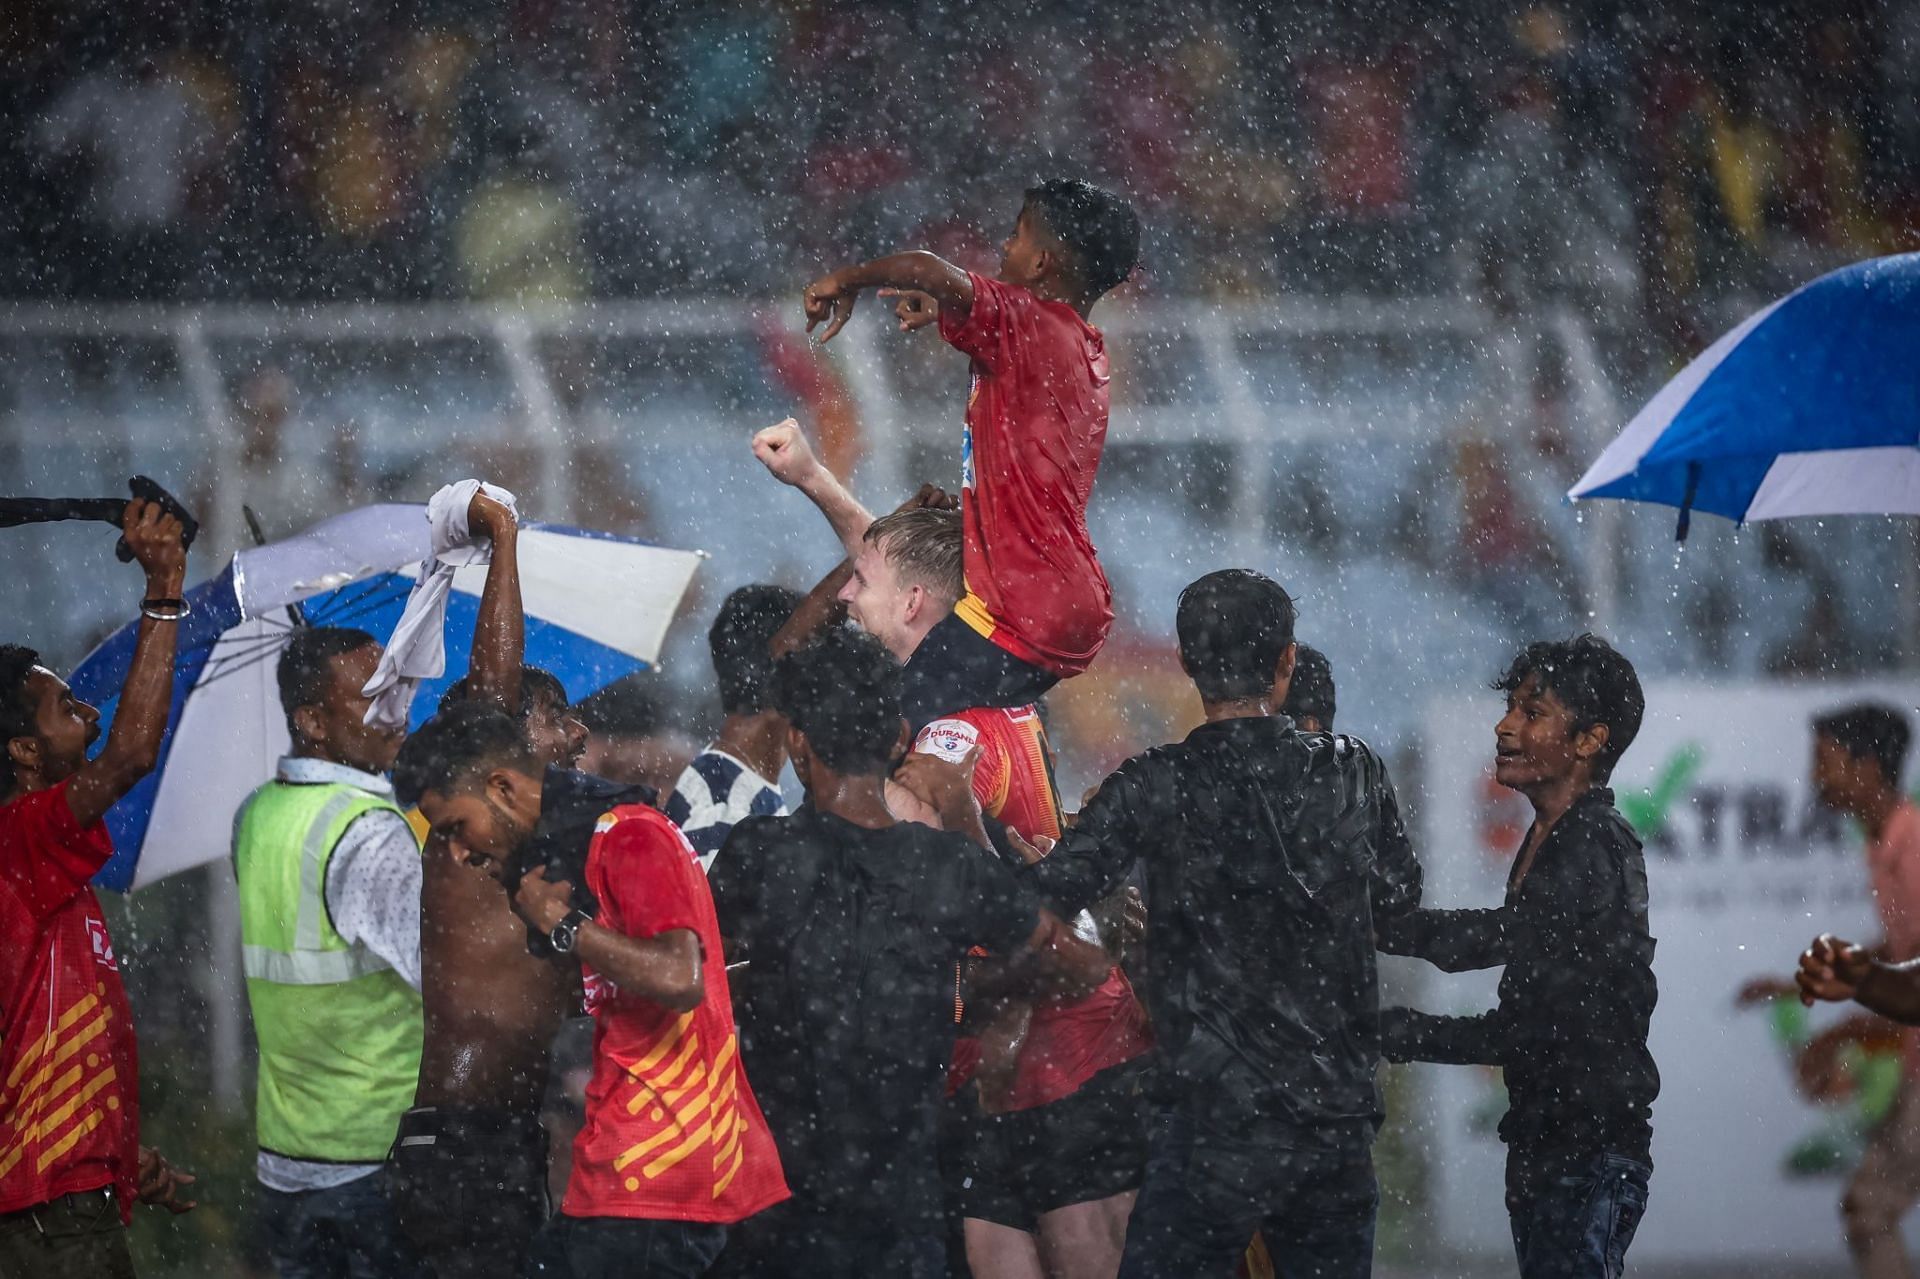 East Bengal picked up their first derby win since 2019 as they defeated Mohun Bagan in the Durand Cup.